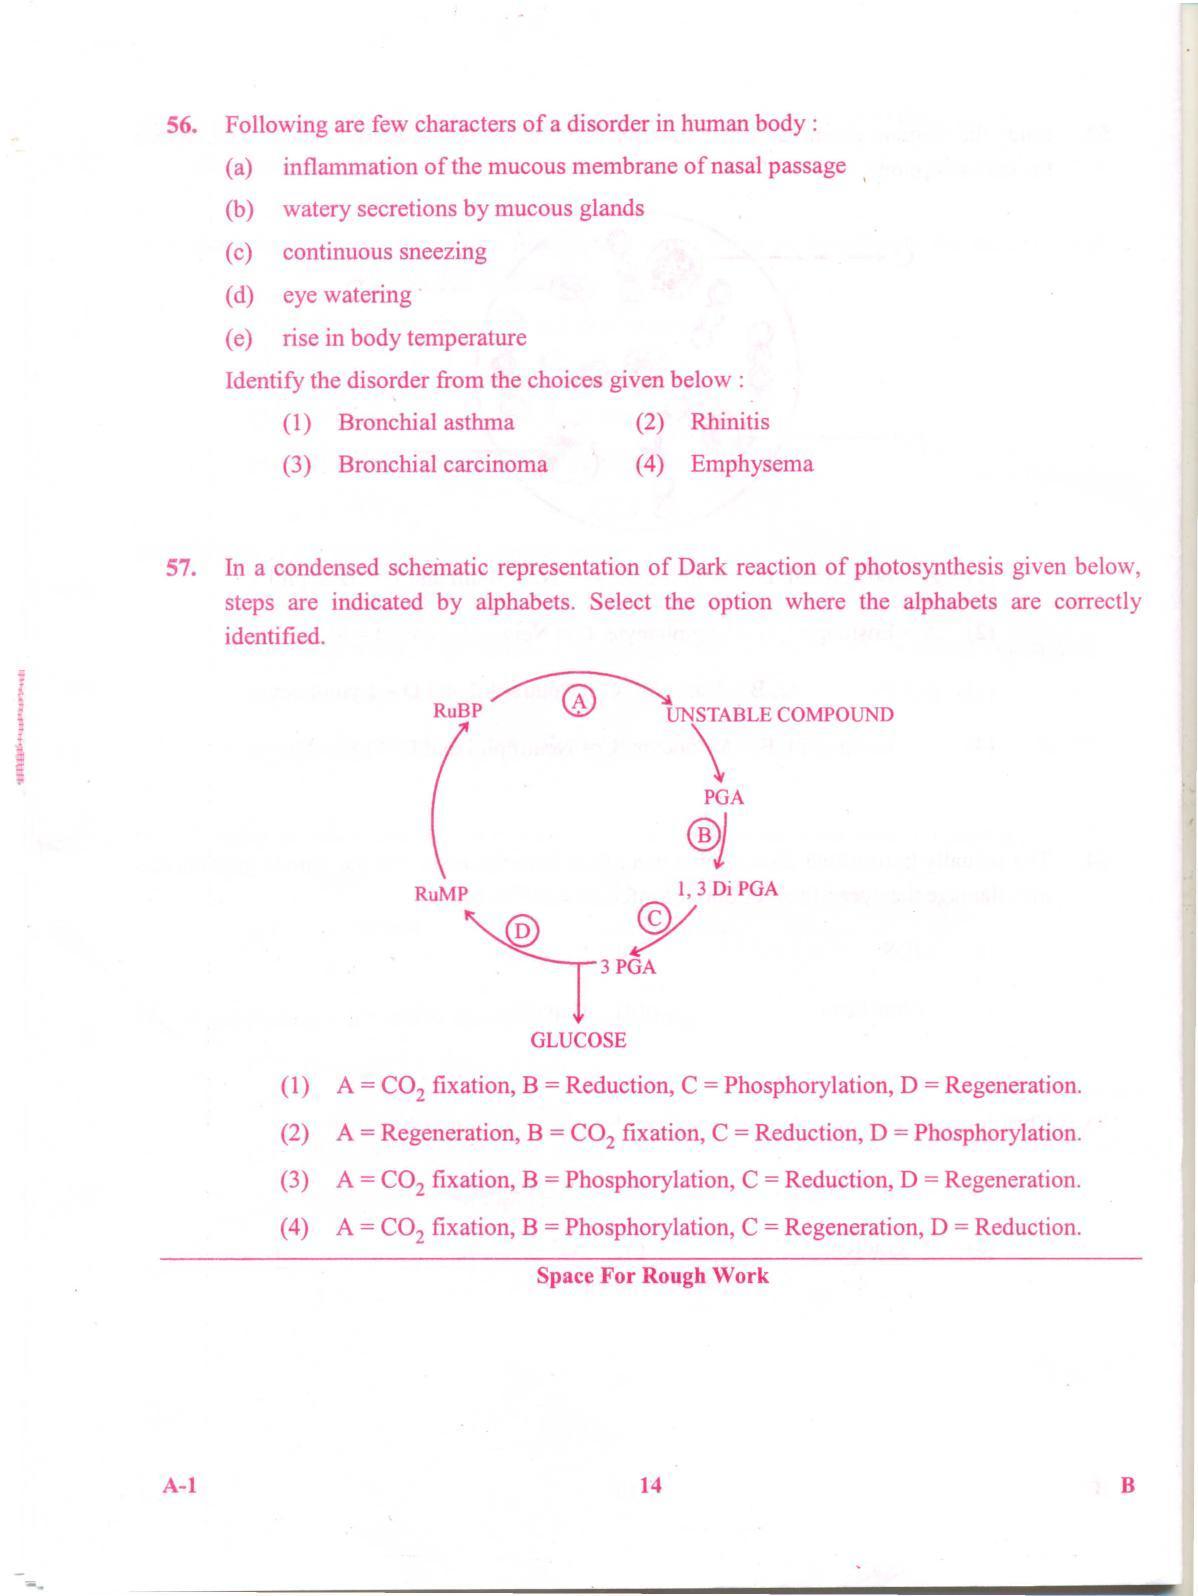 KCET Biology 2012 Question Papers - Page 14